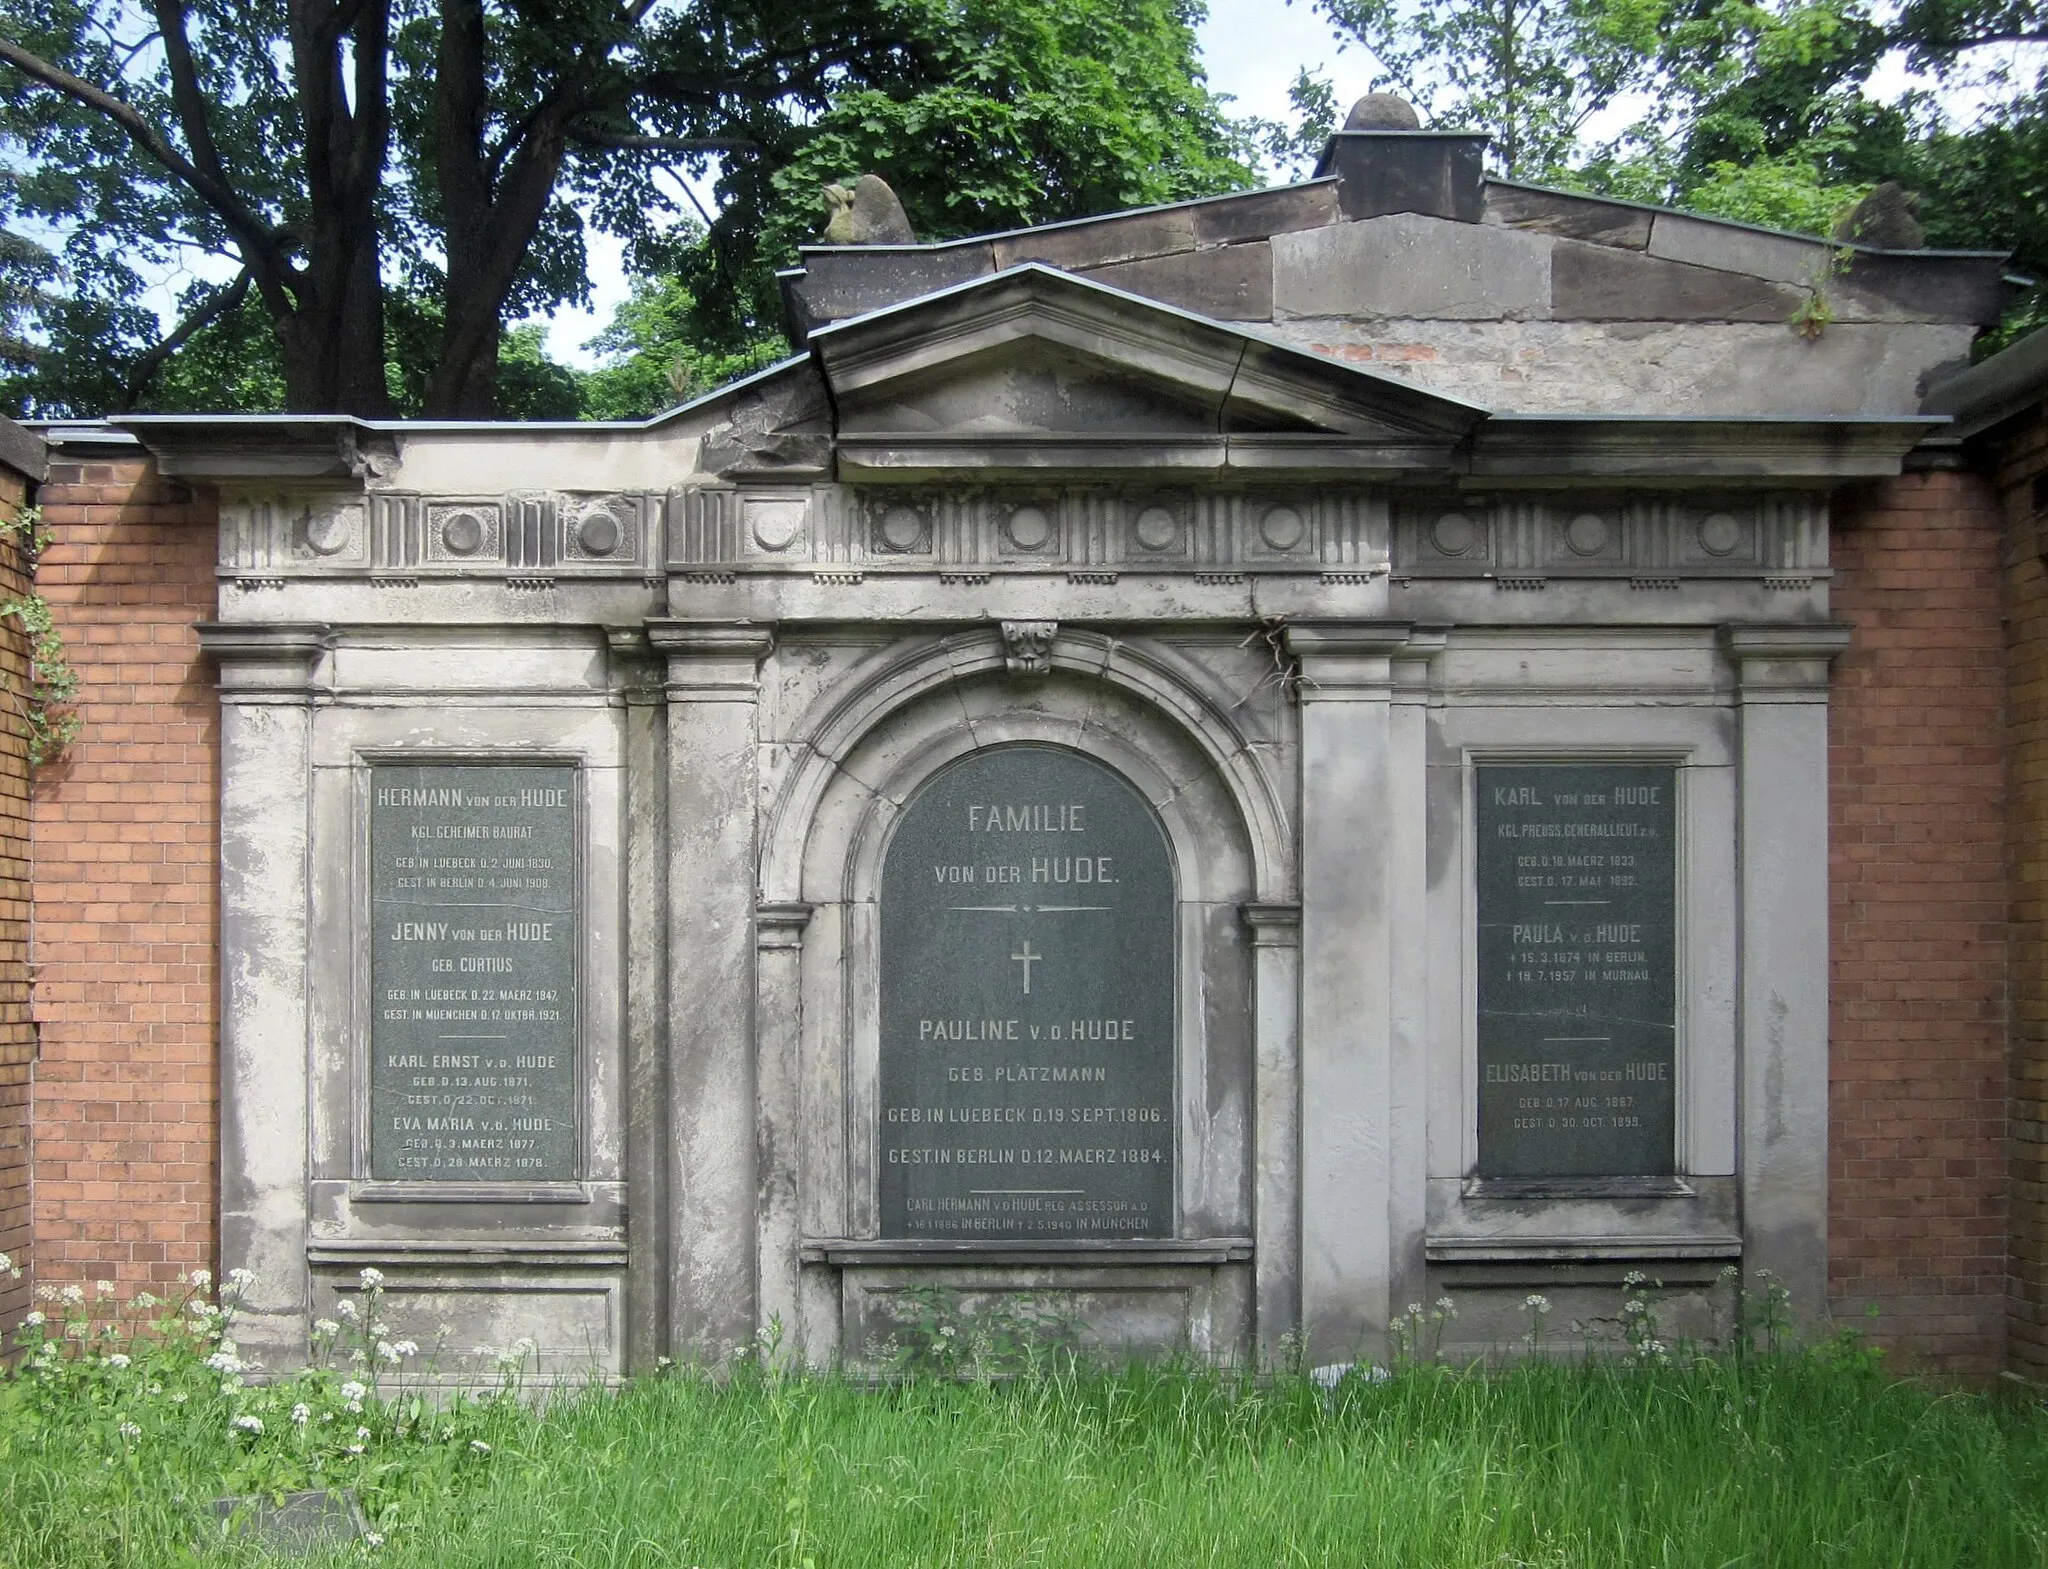 Photo showing: Grave of the von der Hude family on the Cemetery IV of the Jerusalem and New Church at Bergmannstraße No. 45-47 in Berlin-Kreuzberg. Those who found their final resting place here include the architect Hermann von der Hude (1830-1908) and Lieutenant-General Karl von der Hude (1833-1892).